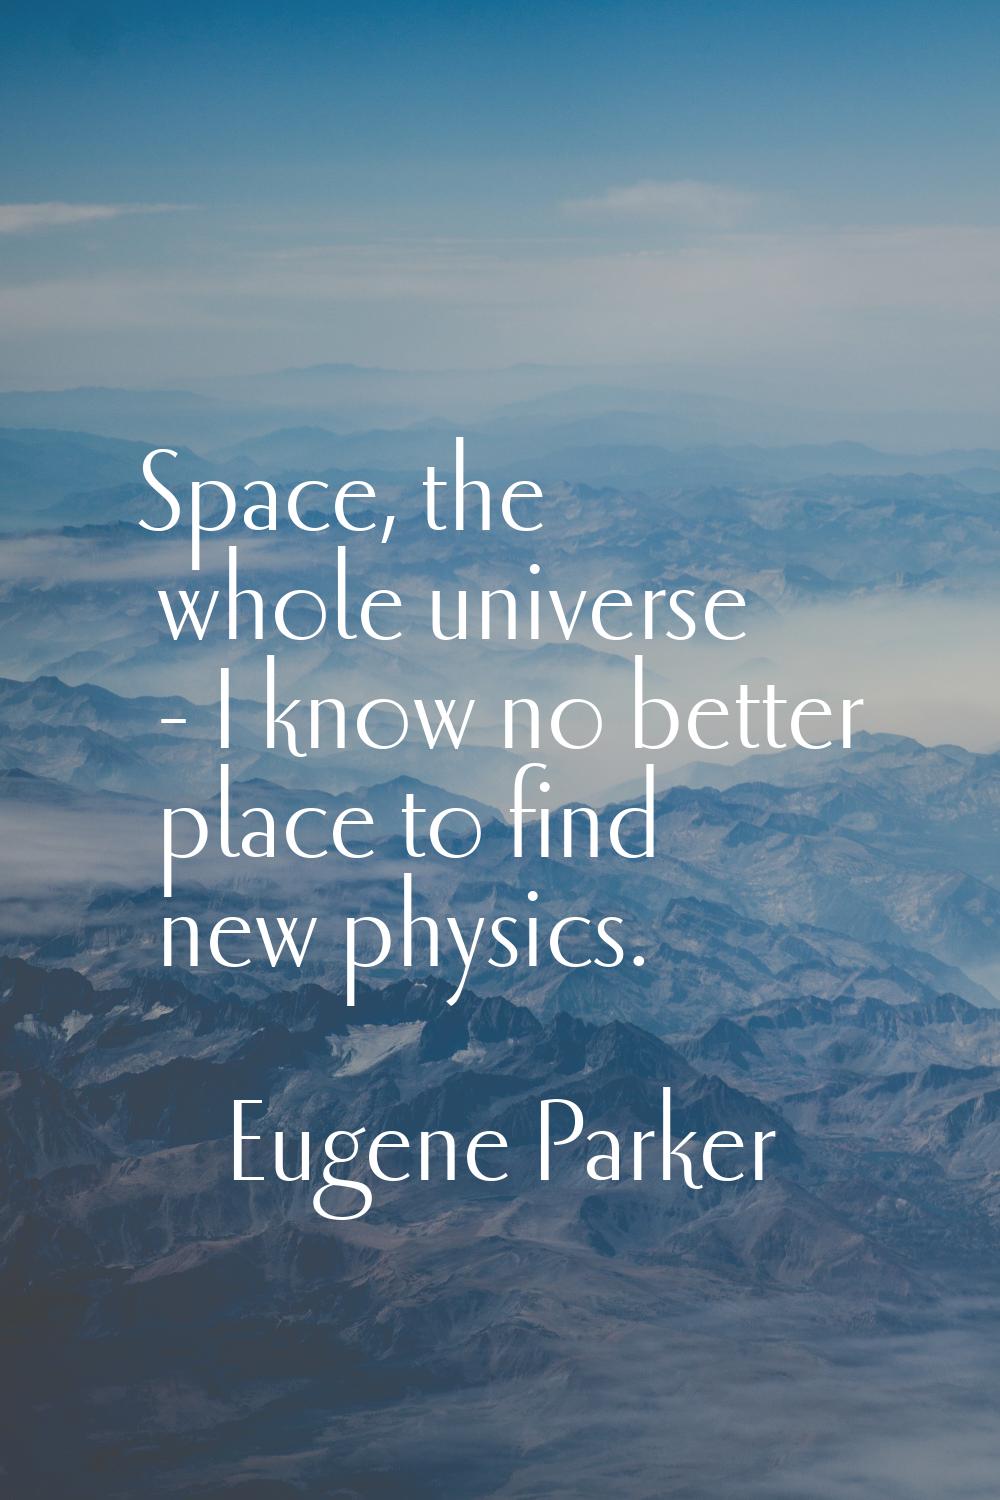 Space, the whole universe - I know no better place to find new physics.